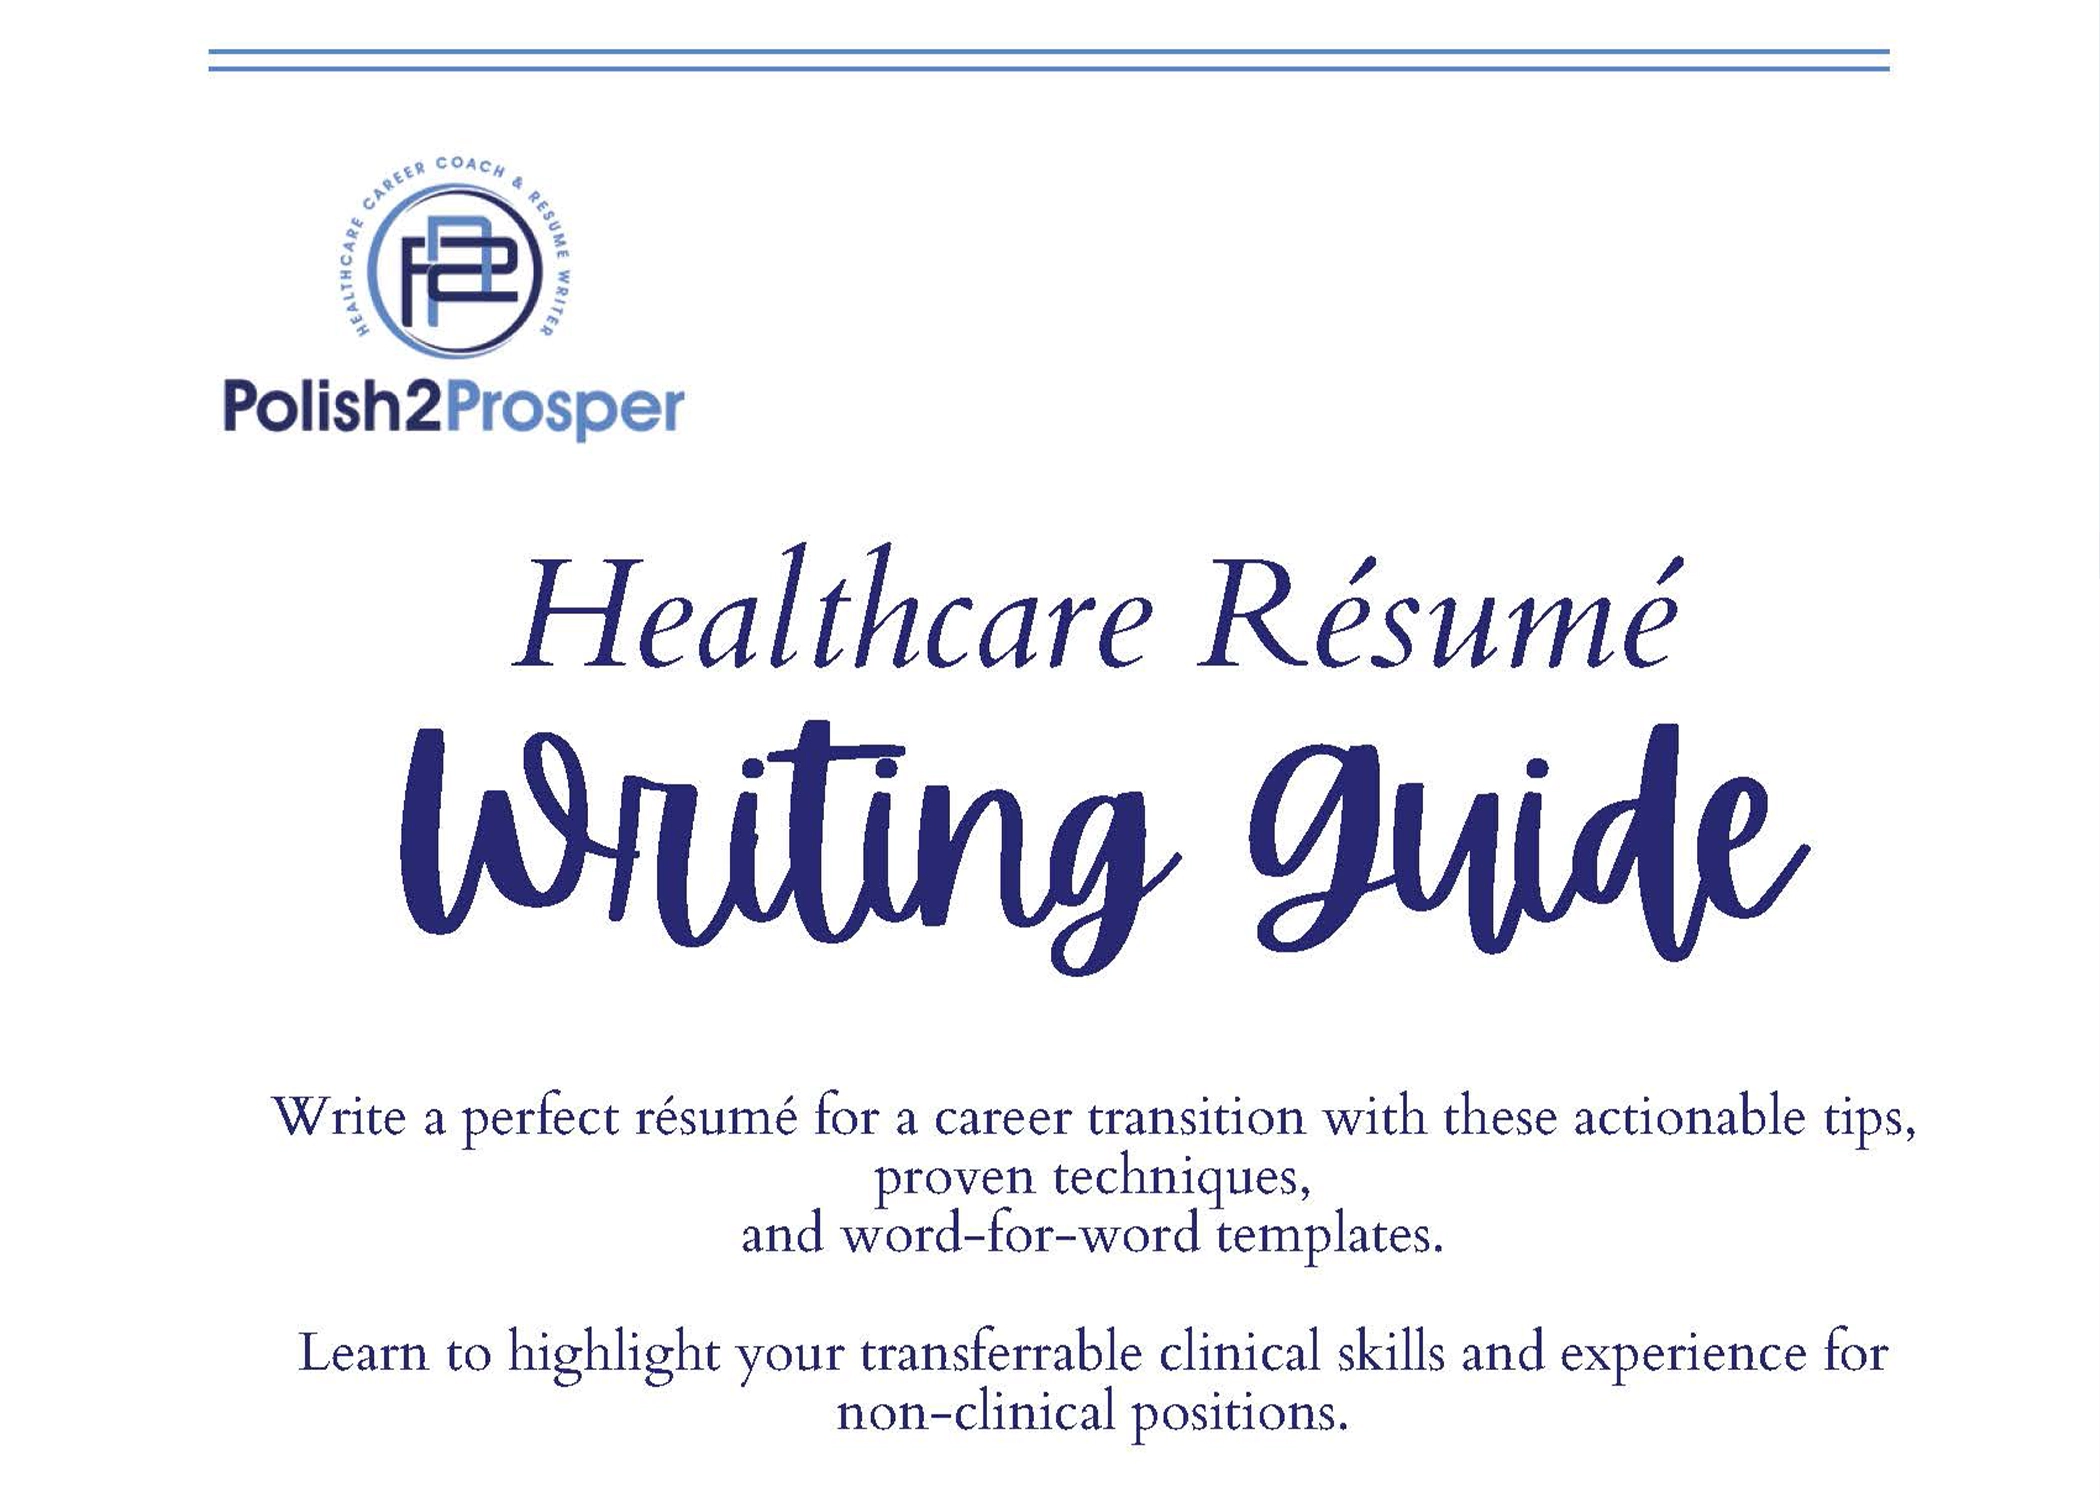 Healthcare Resume Writing Guide